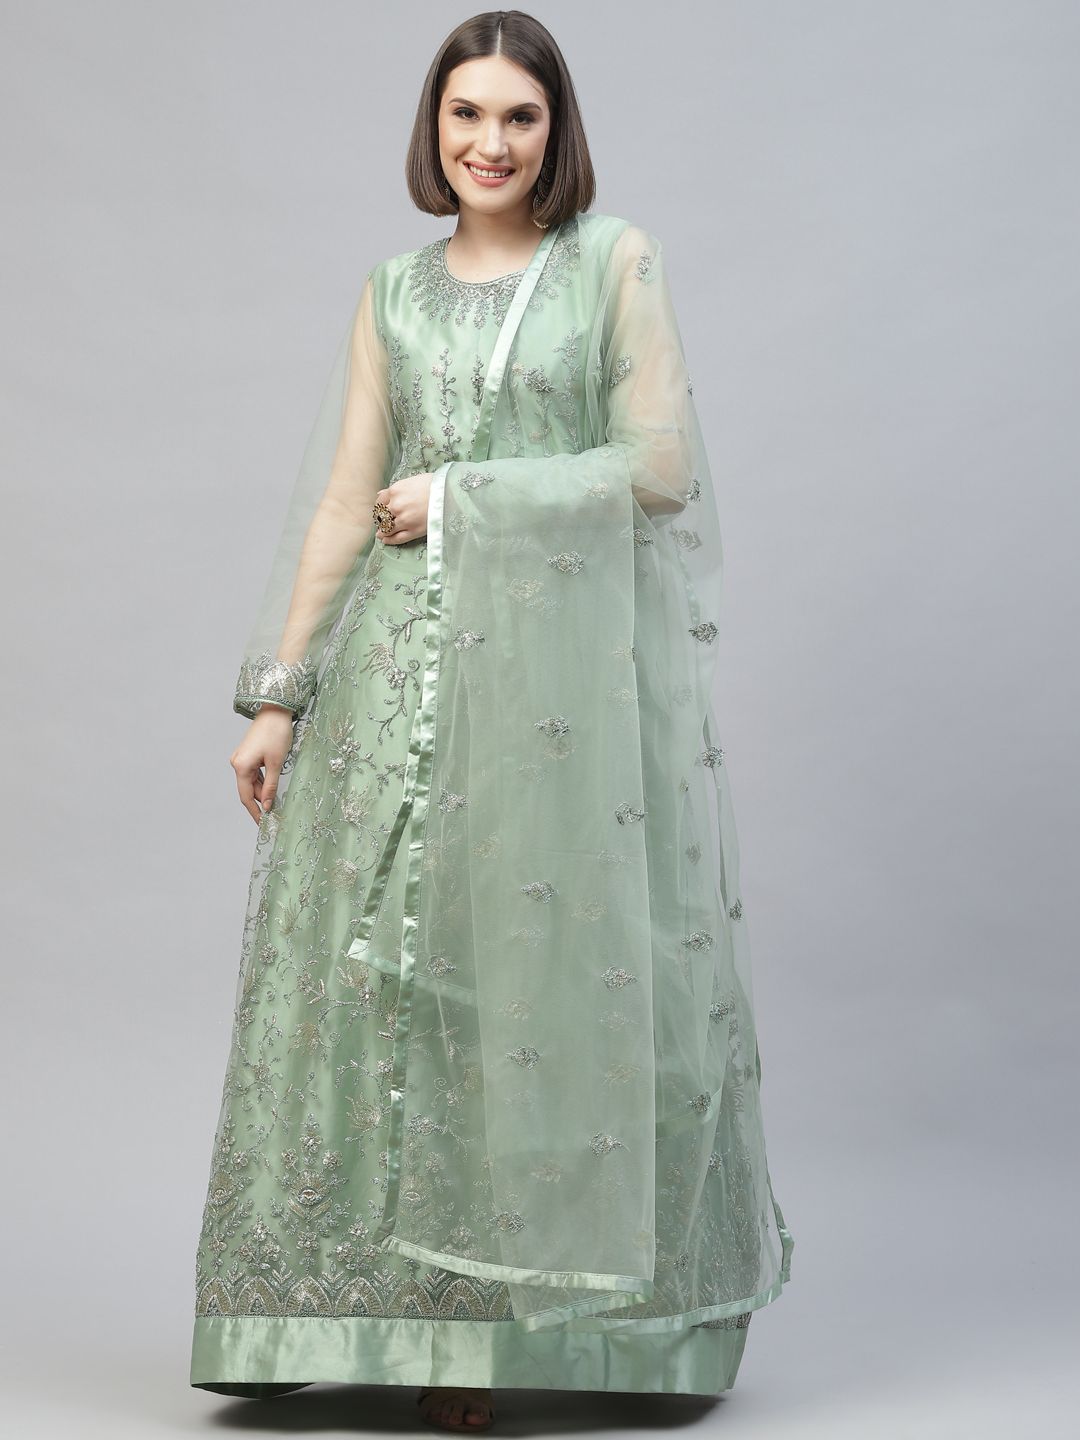 Readiprint Fashions Green & Gold-Toned Embellished Semi-Stitched Dress Material Price in India